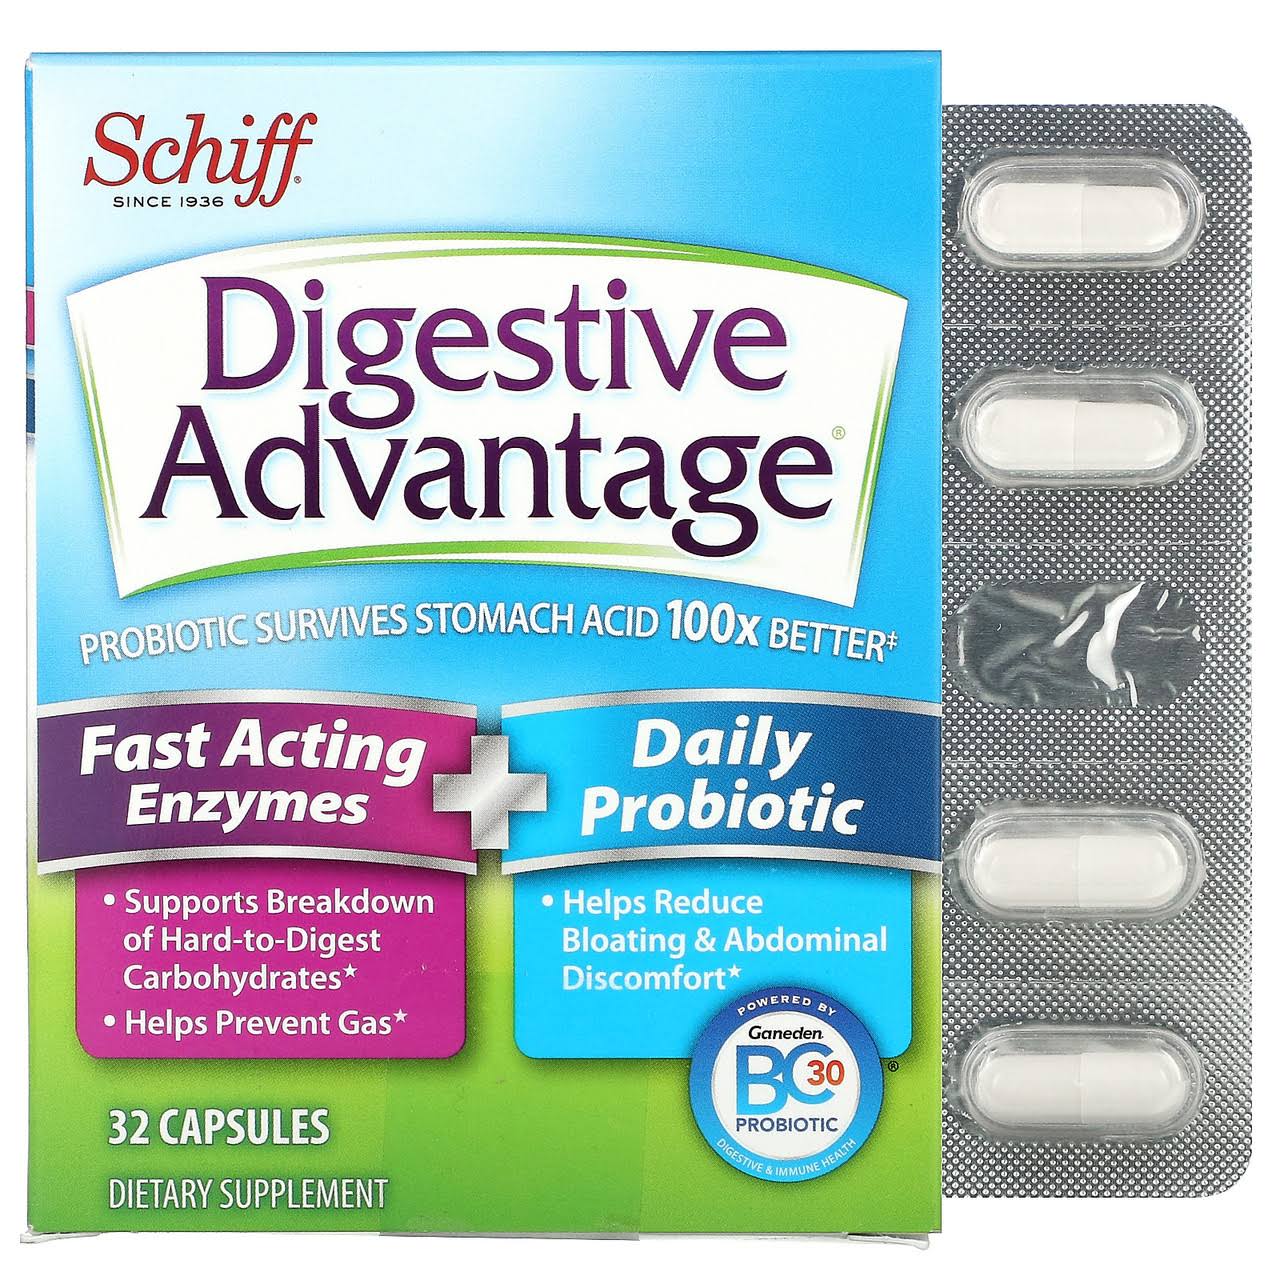 Schiff Digestive Advantage Fast Acting Enzymes Plus Daily Probiotic Dietary Supplement - 32ct